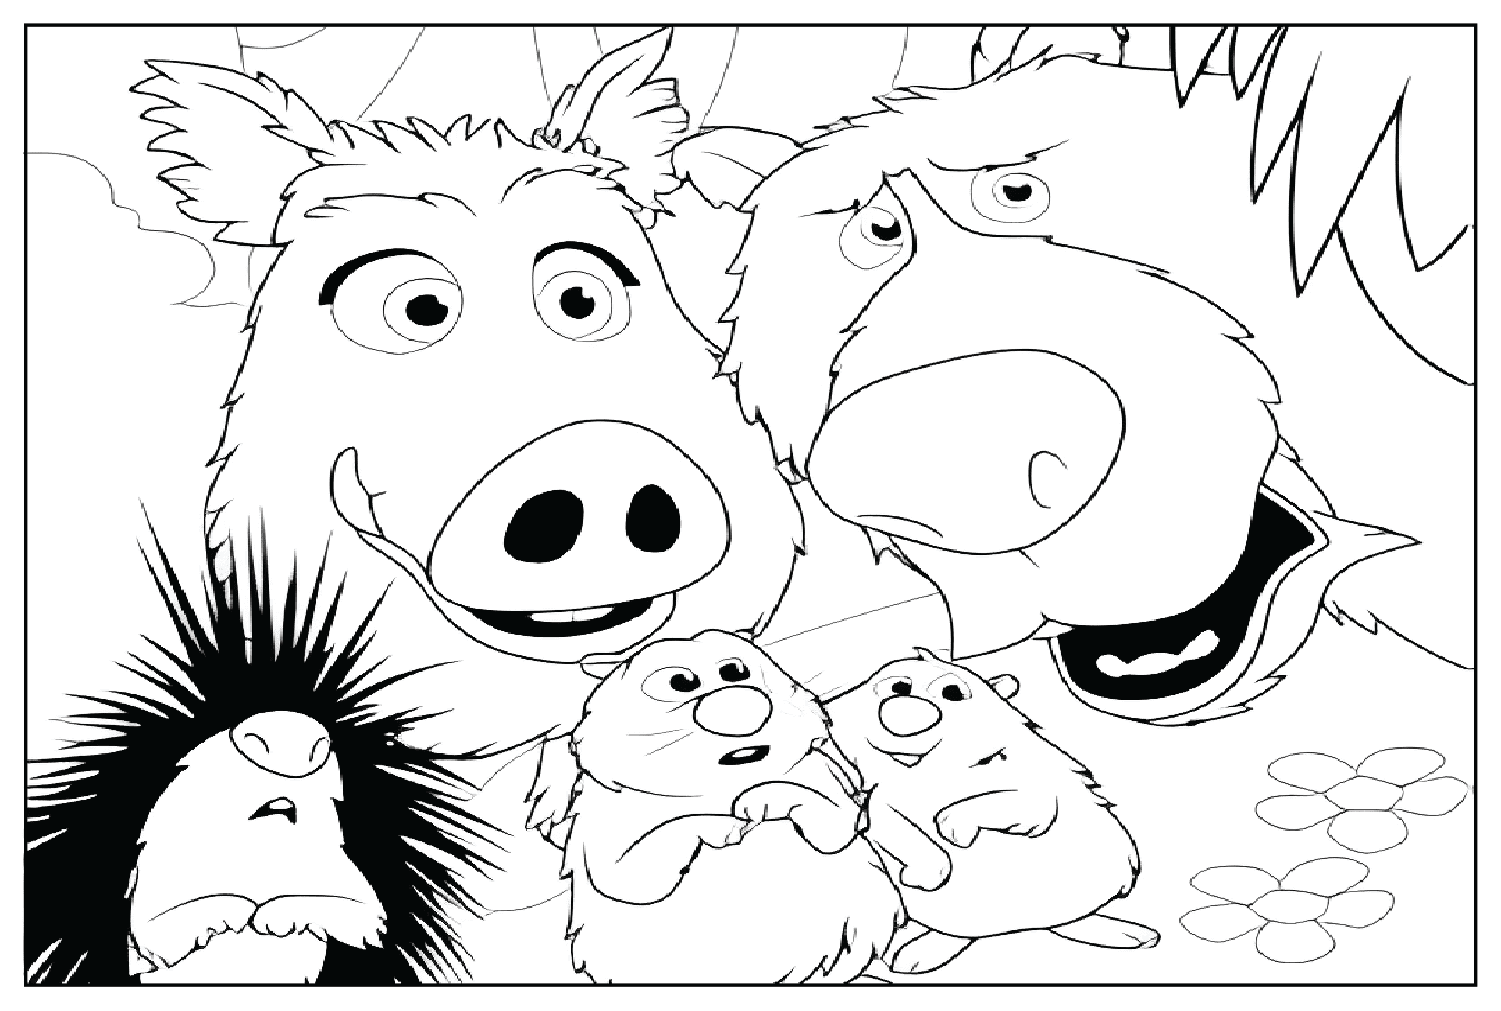 Adventures in Wonder Park Coloring Page Free from Adventures in Wonder Park